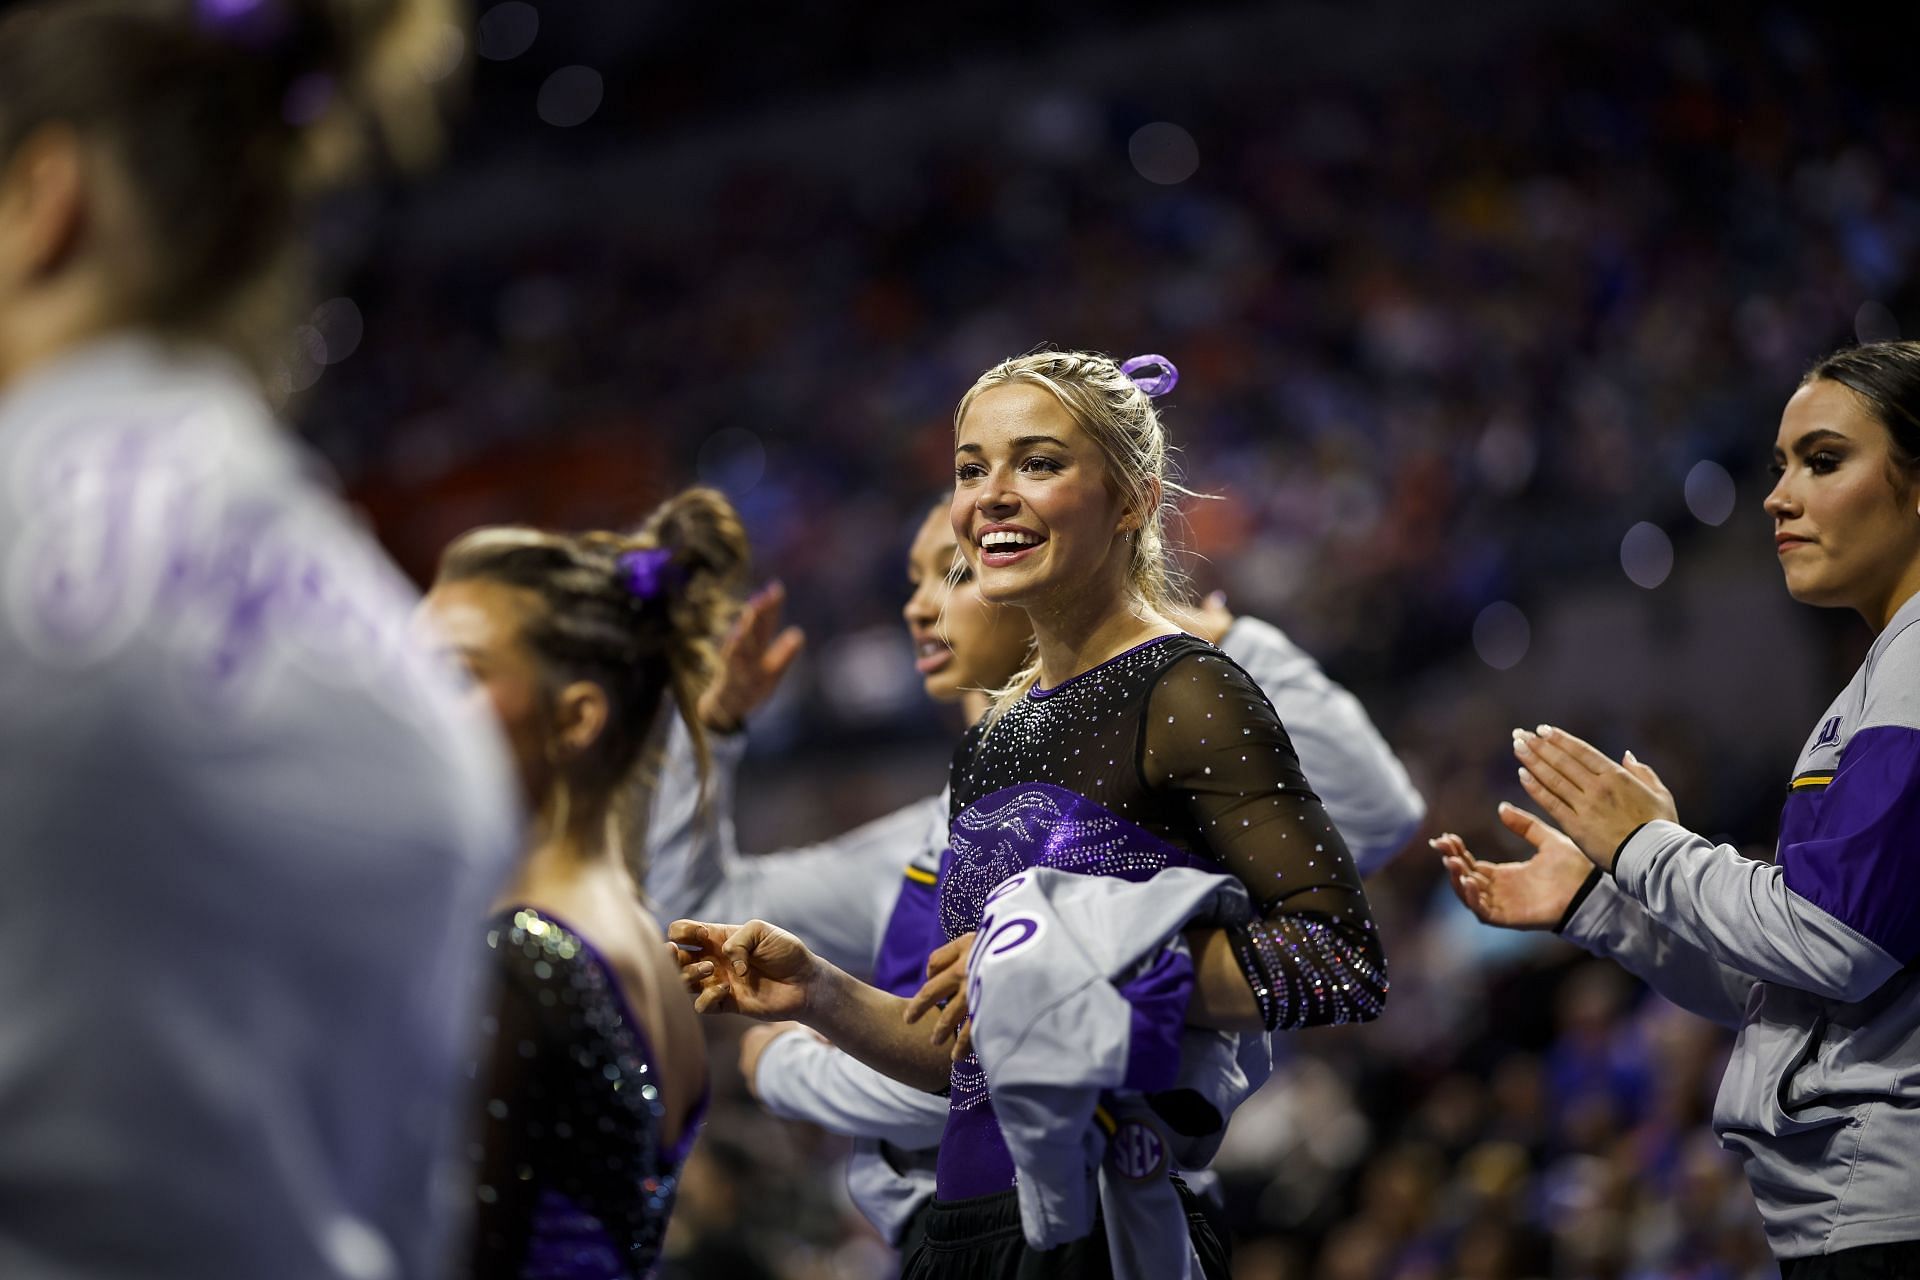 LSU Gymnast and social media sensation, Oliva Dunne, recently won an NCAA championship with her team during her senior year.